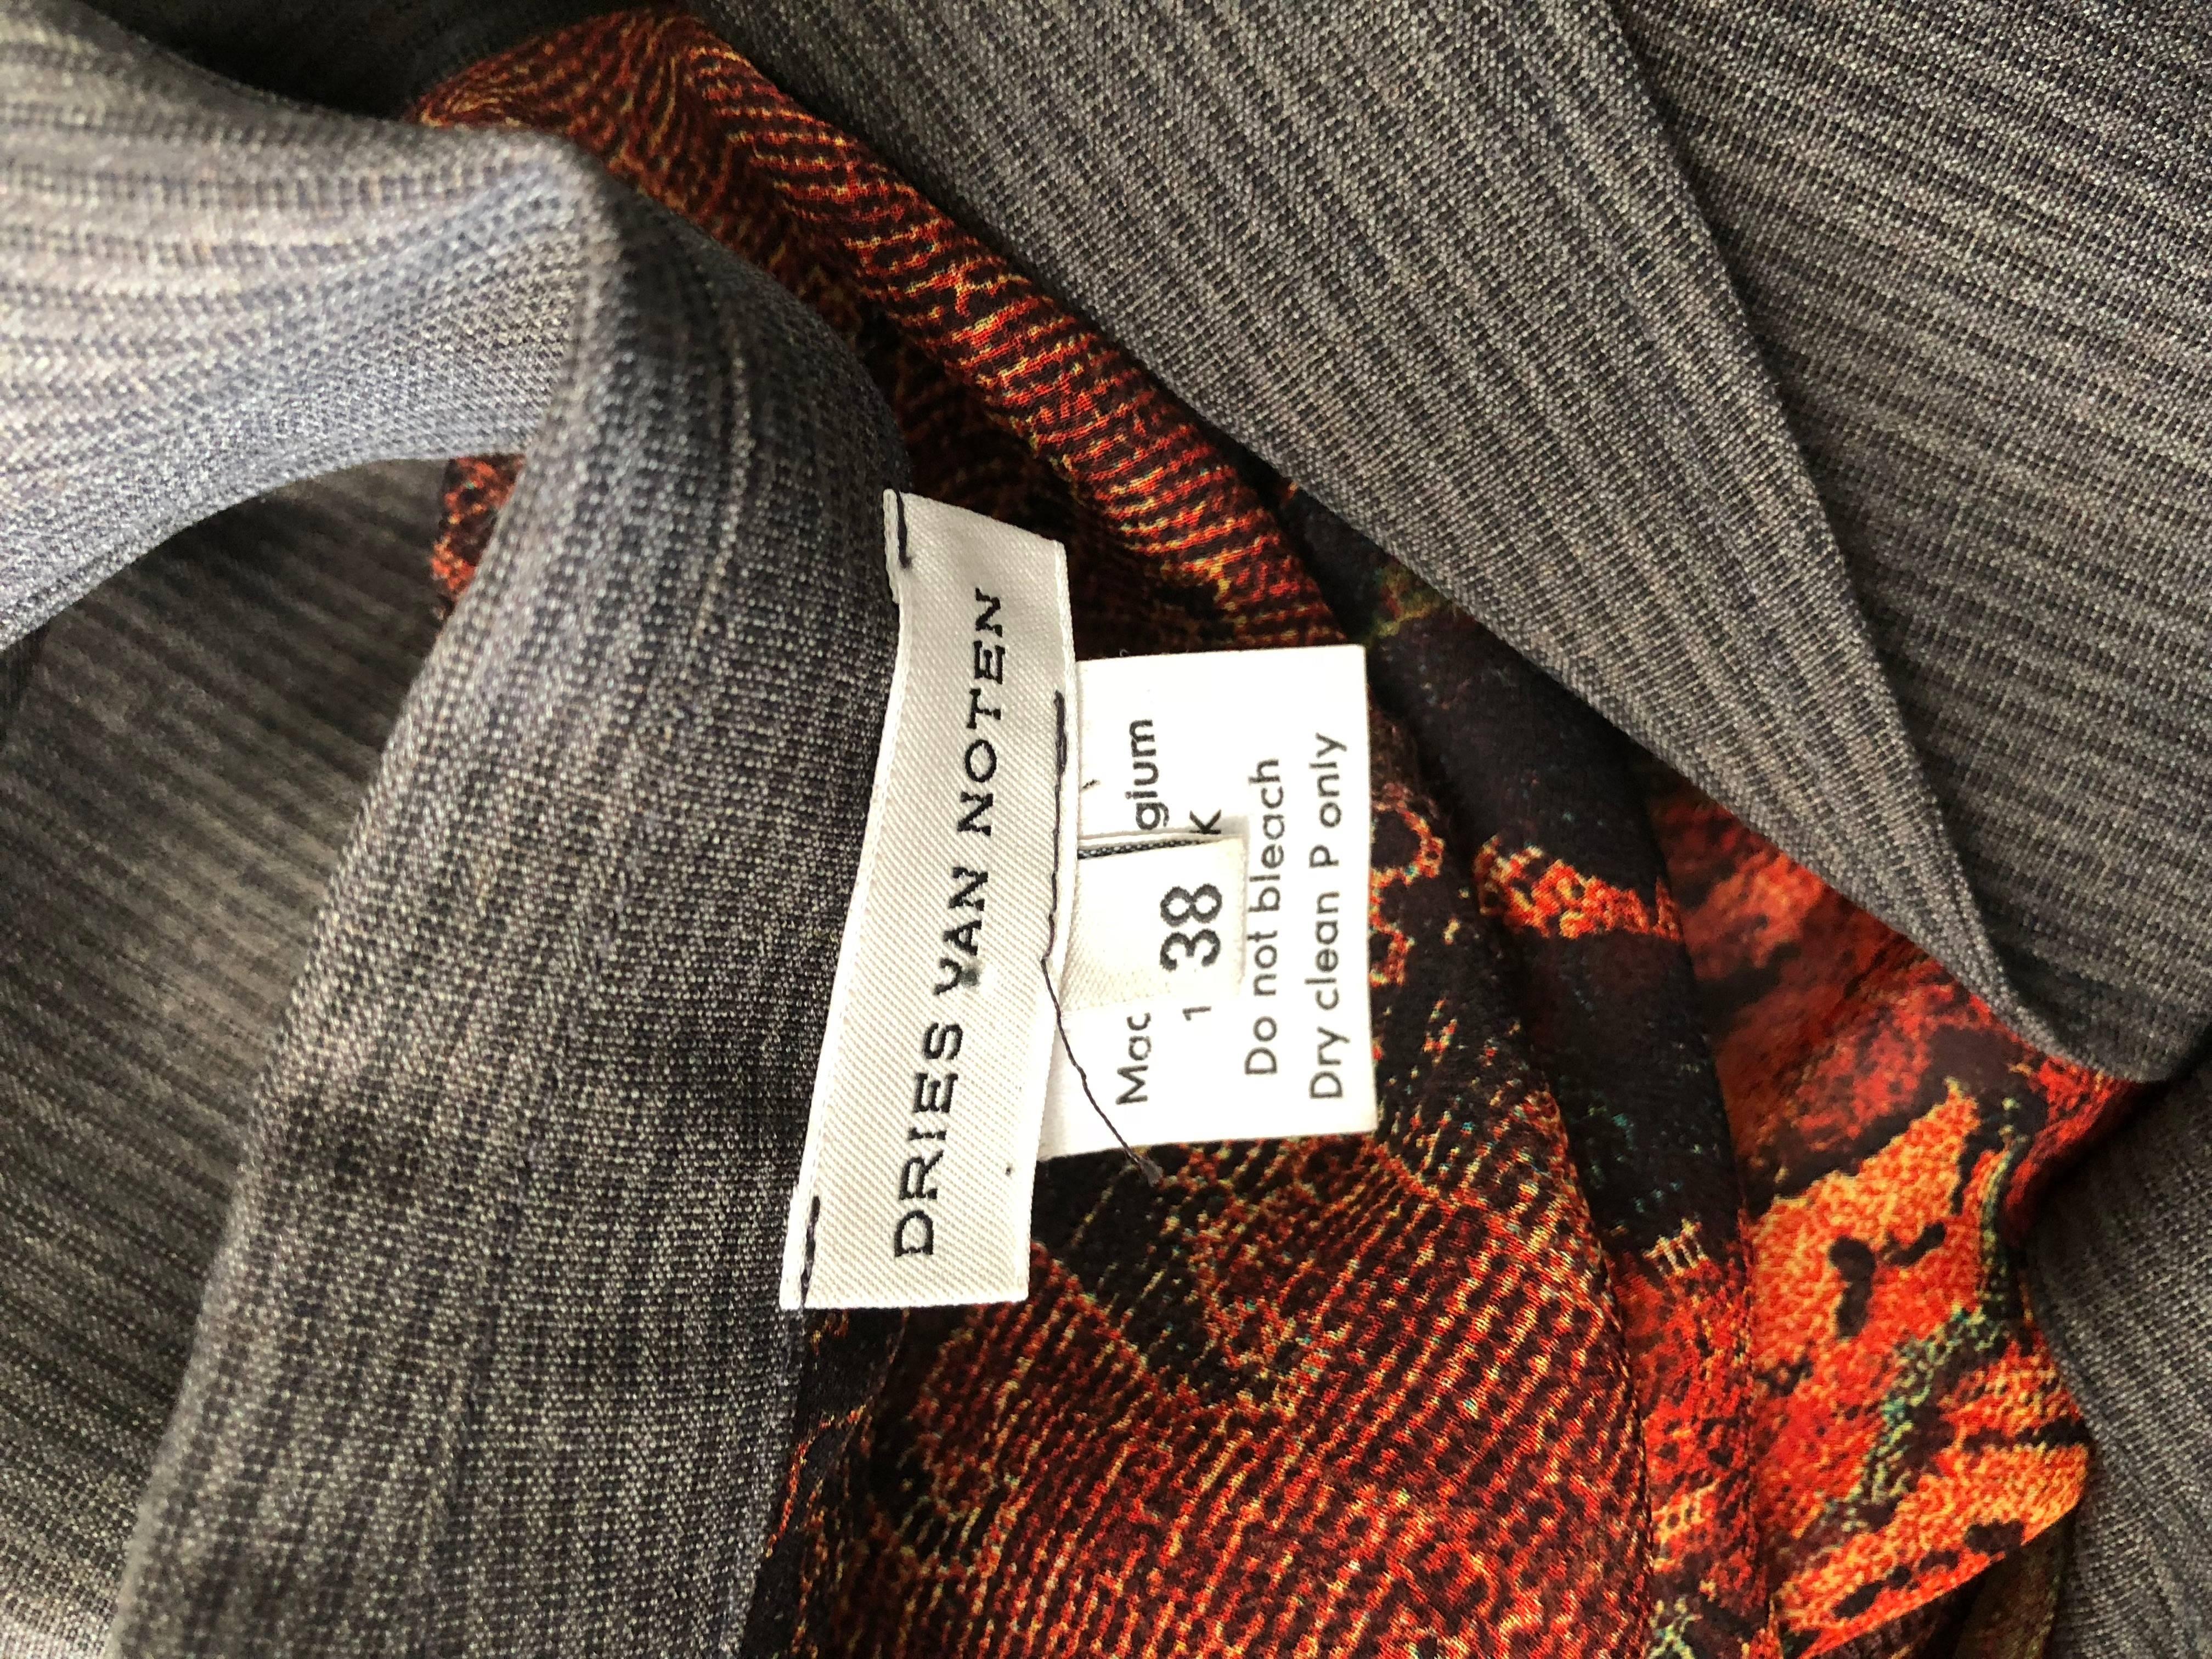 This rare vintage 90s DRIES VAN NOTEN piece comes from the estate of MARILYN LEWIS! Lewis was the founder and designer of the highly sought after Cardnali fashion house in 1966! Her pieces were sold at Neiman Marcus, Saks, Bergdorf Goodman, to name